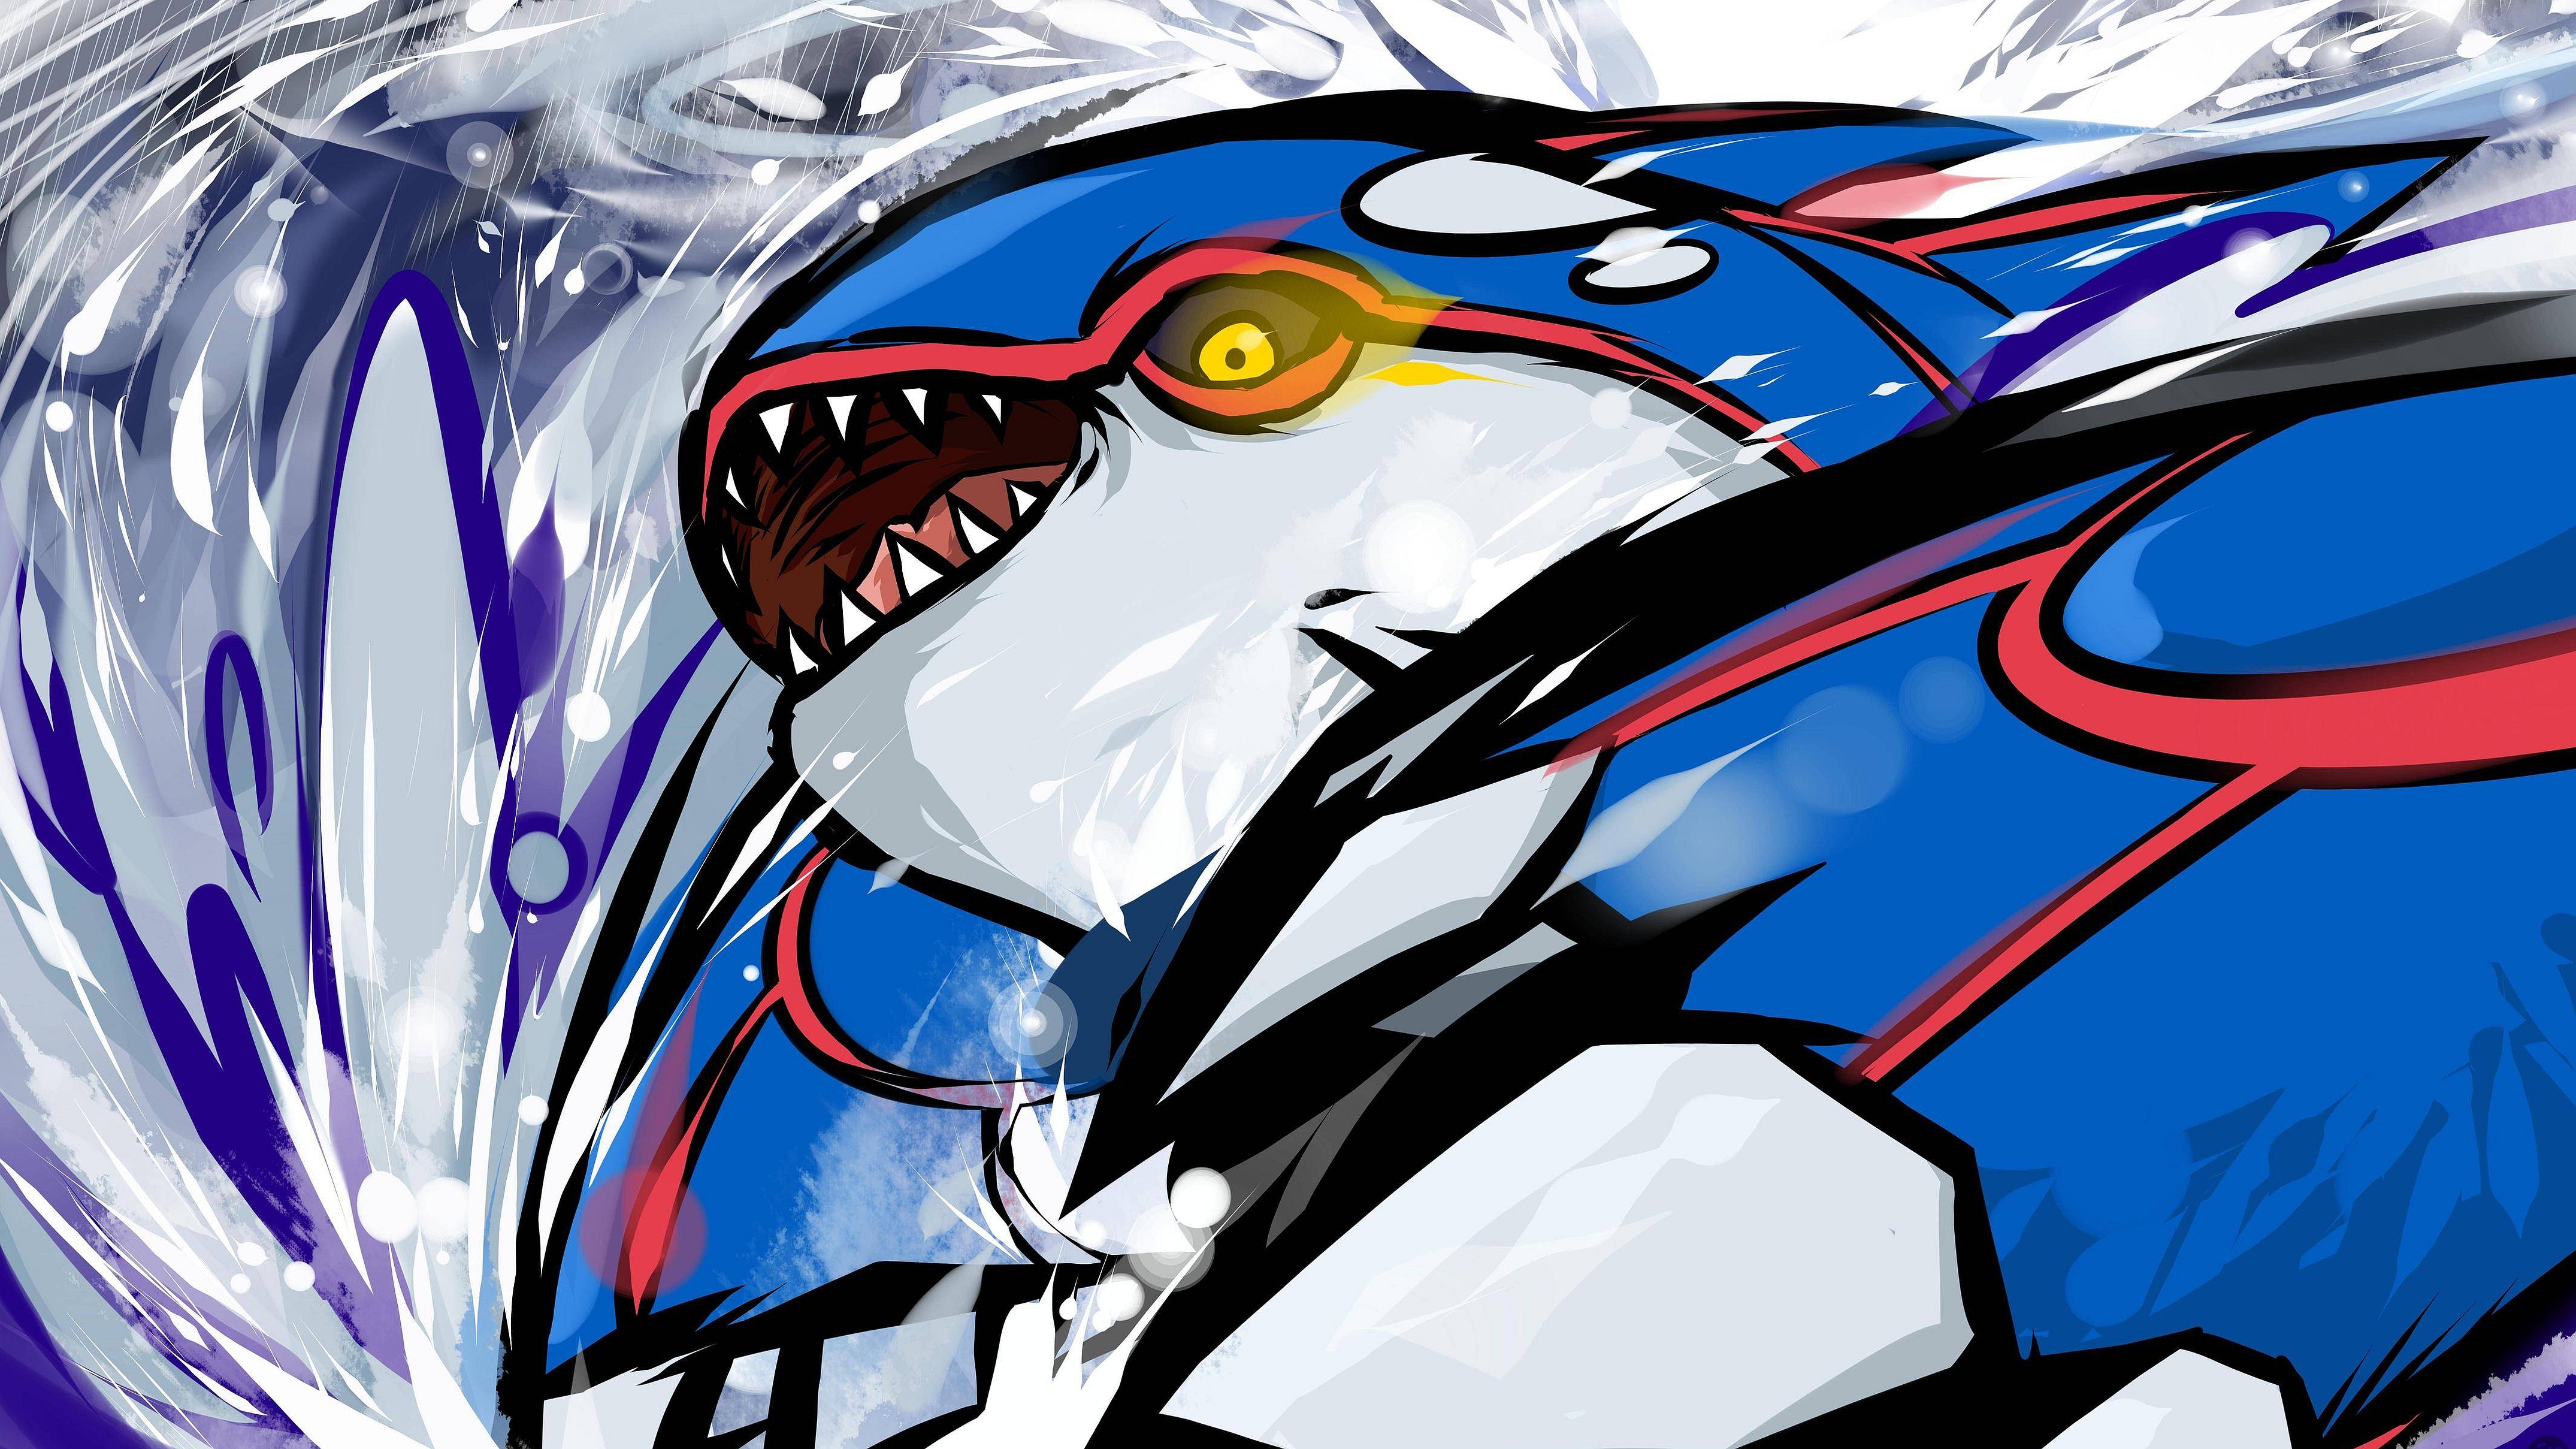 36 Kyogre (Pokémon) HD Wallpapers | Background Images - Wallpaper Abyss